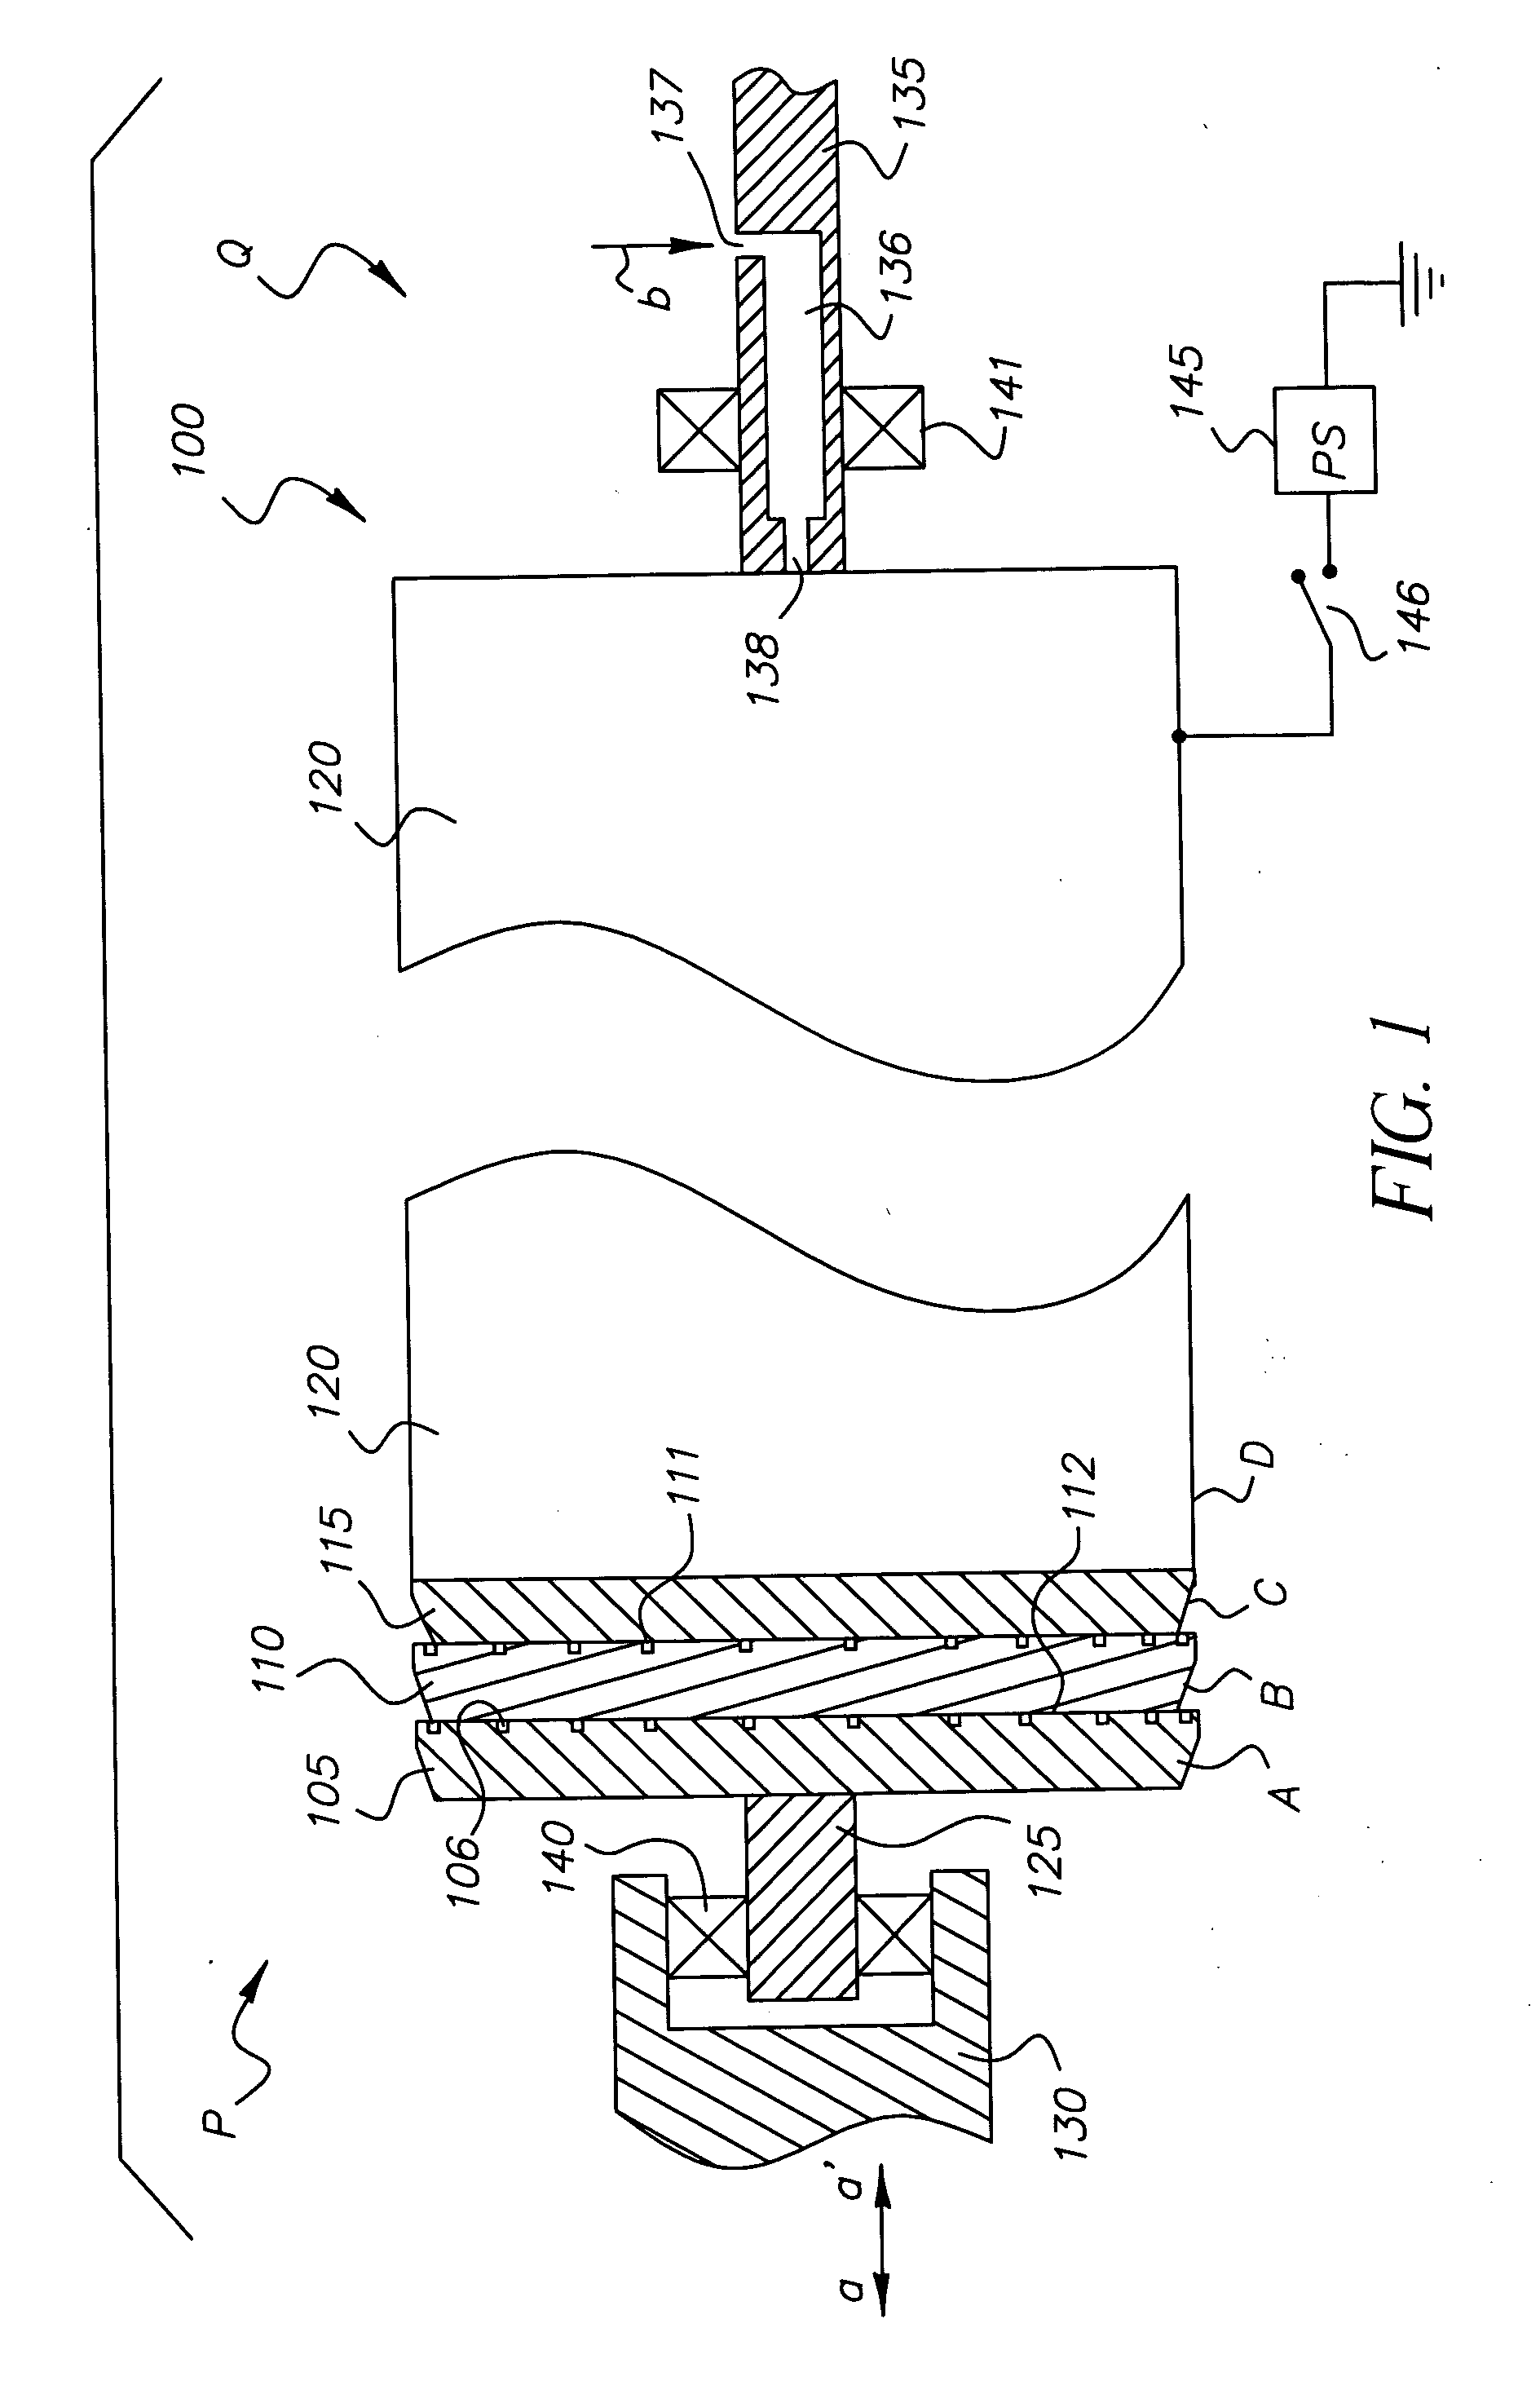 Fixture for mounting a sleeve member on a mandrel